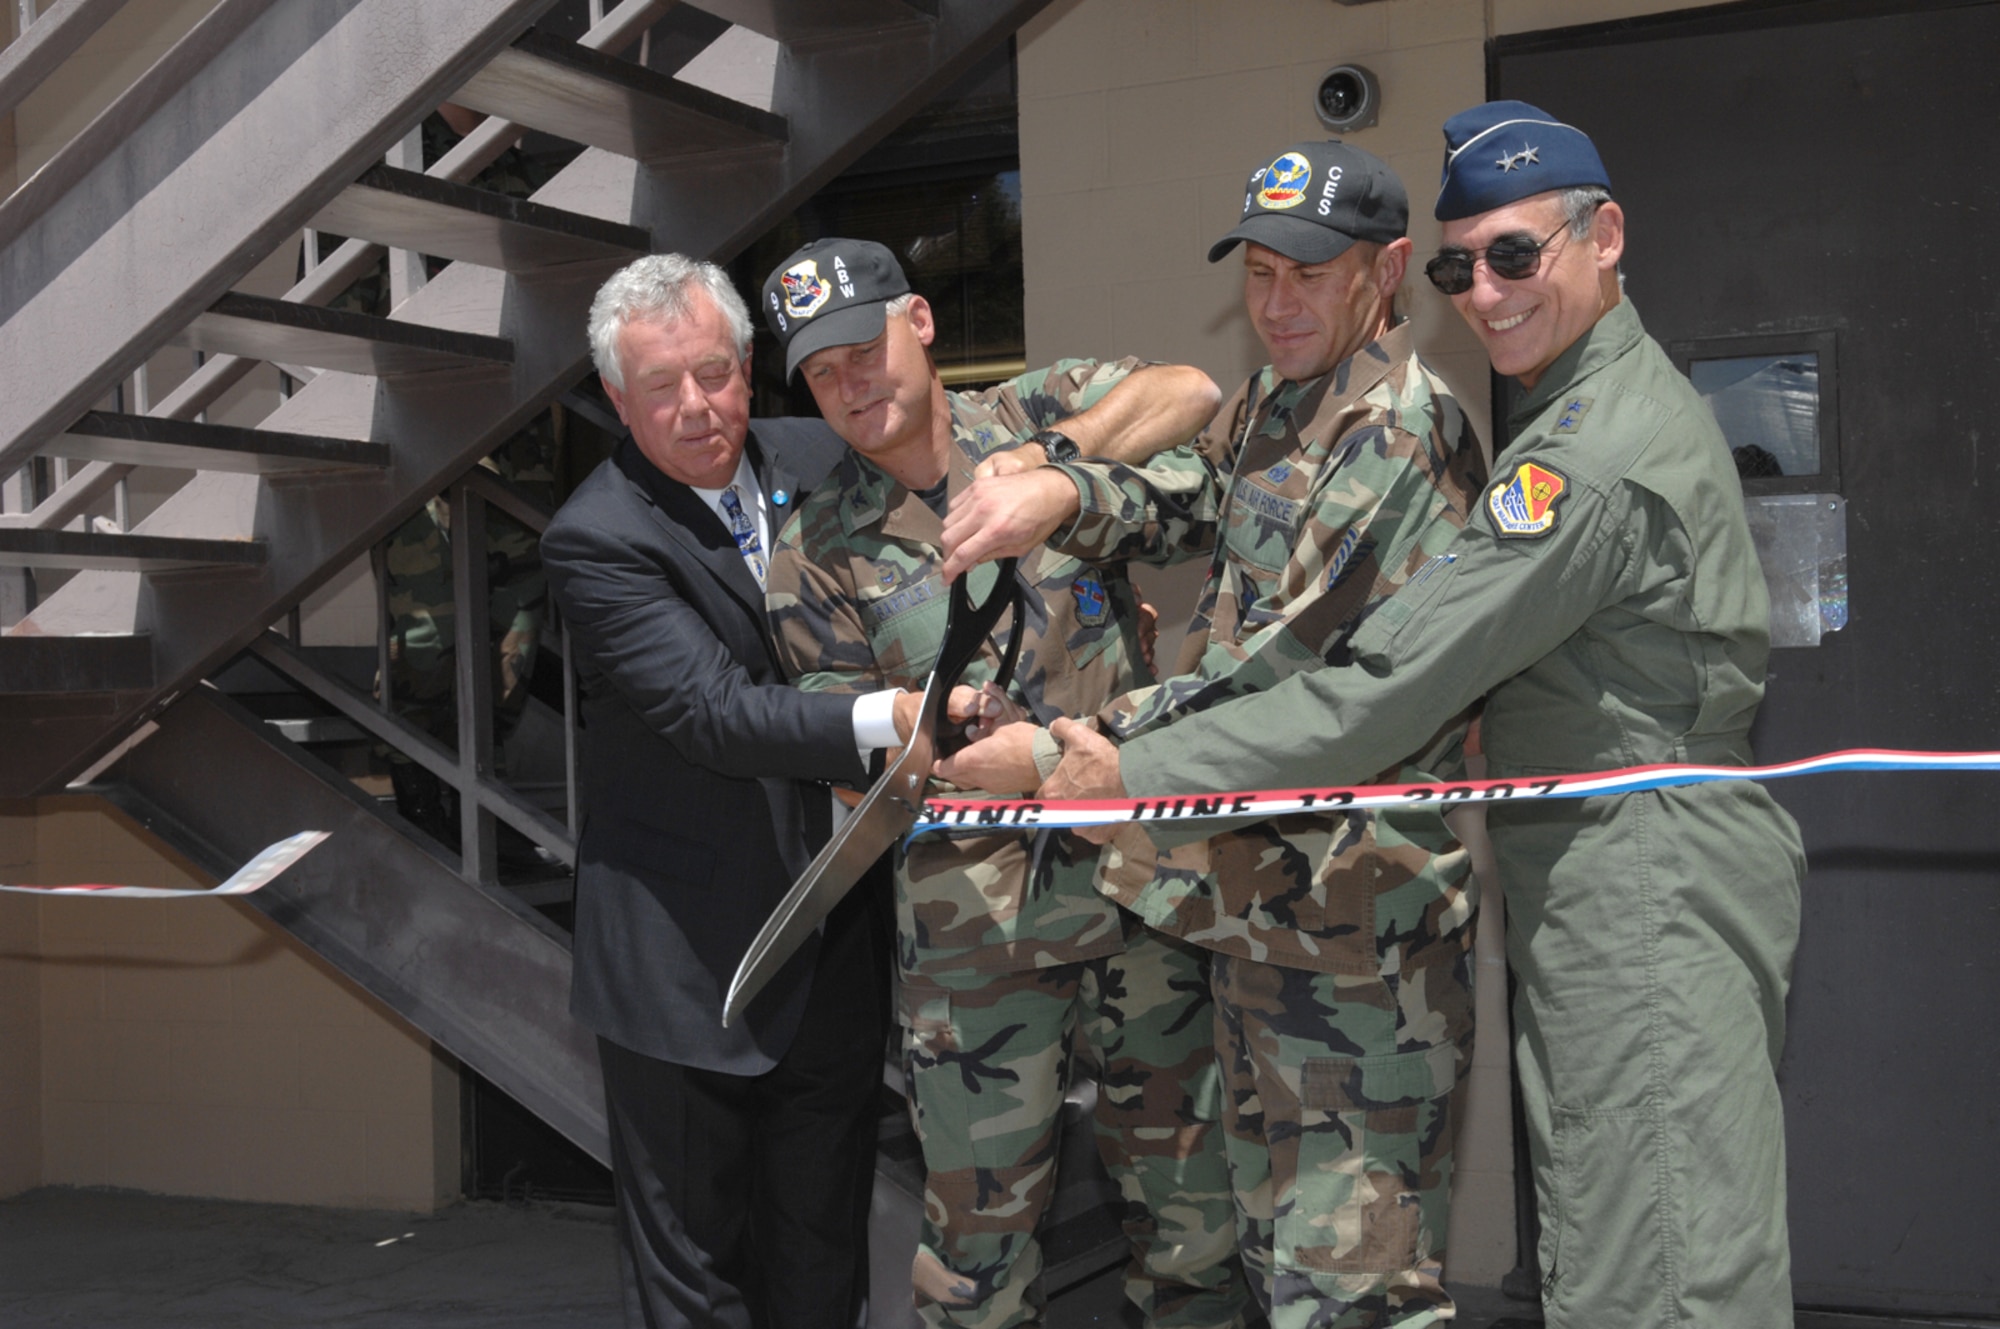 (from left to right) Mr. Randy Black, Colonel Michael Bartley, 99th Air Base Wing Commander, Technical Sergeant Mark Kerr, project manager, and Major General R. Michael Worden, United States Air Force War Fare Center Commander, officially opens up the newly built Nellis Airmen's Center during a ribbon cutting ceremony  June 12.
(U.S Air Force Photo/Senior Airman Larry E. Reid Jr.)